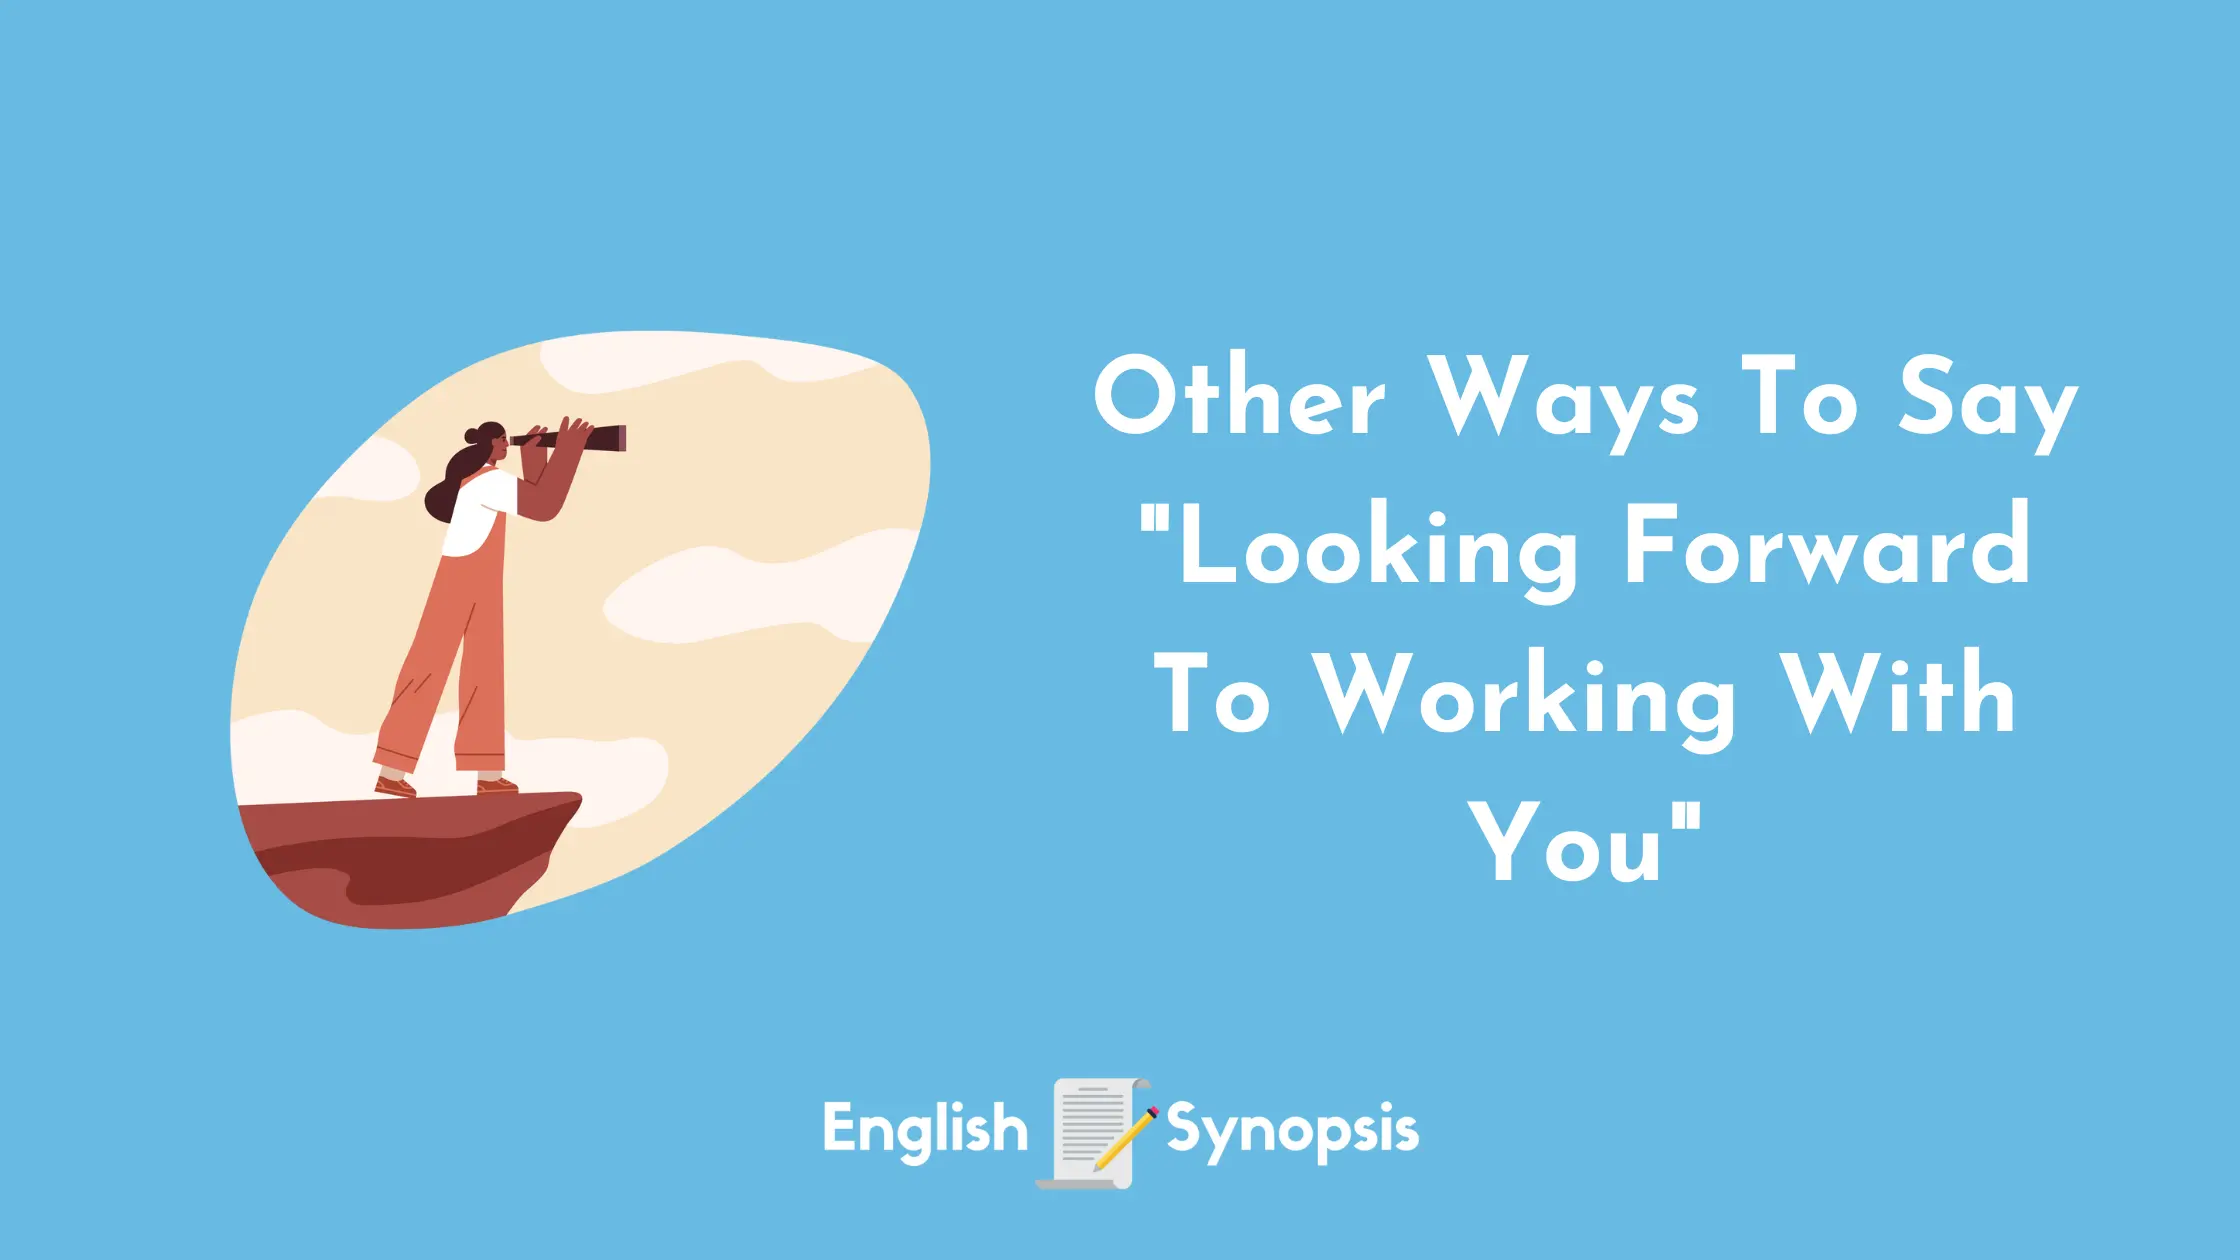 Other Ways To Say "Looking Forward To Working With You"